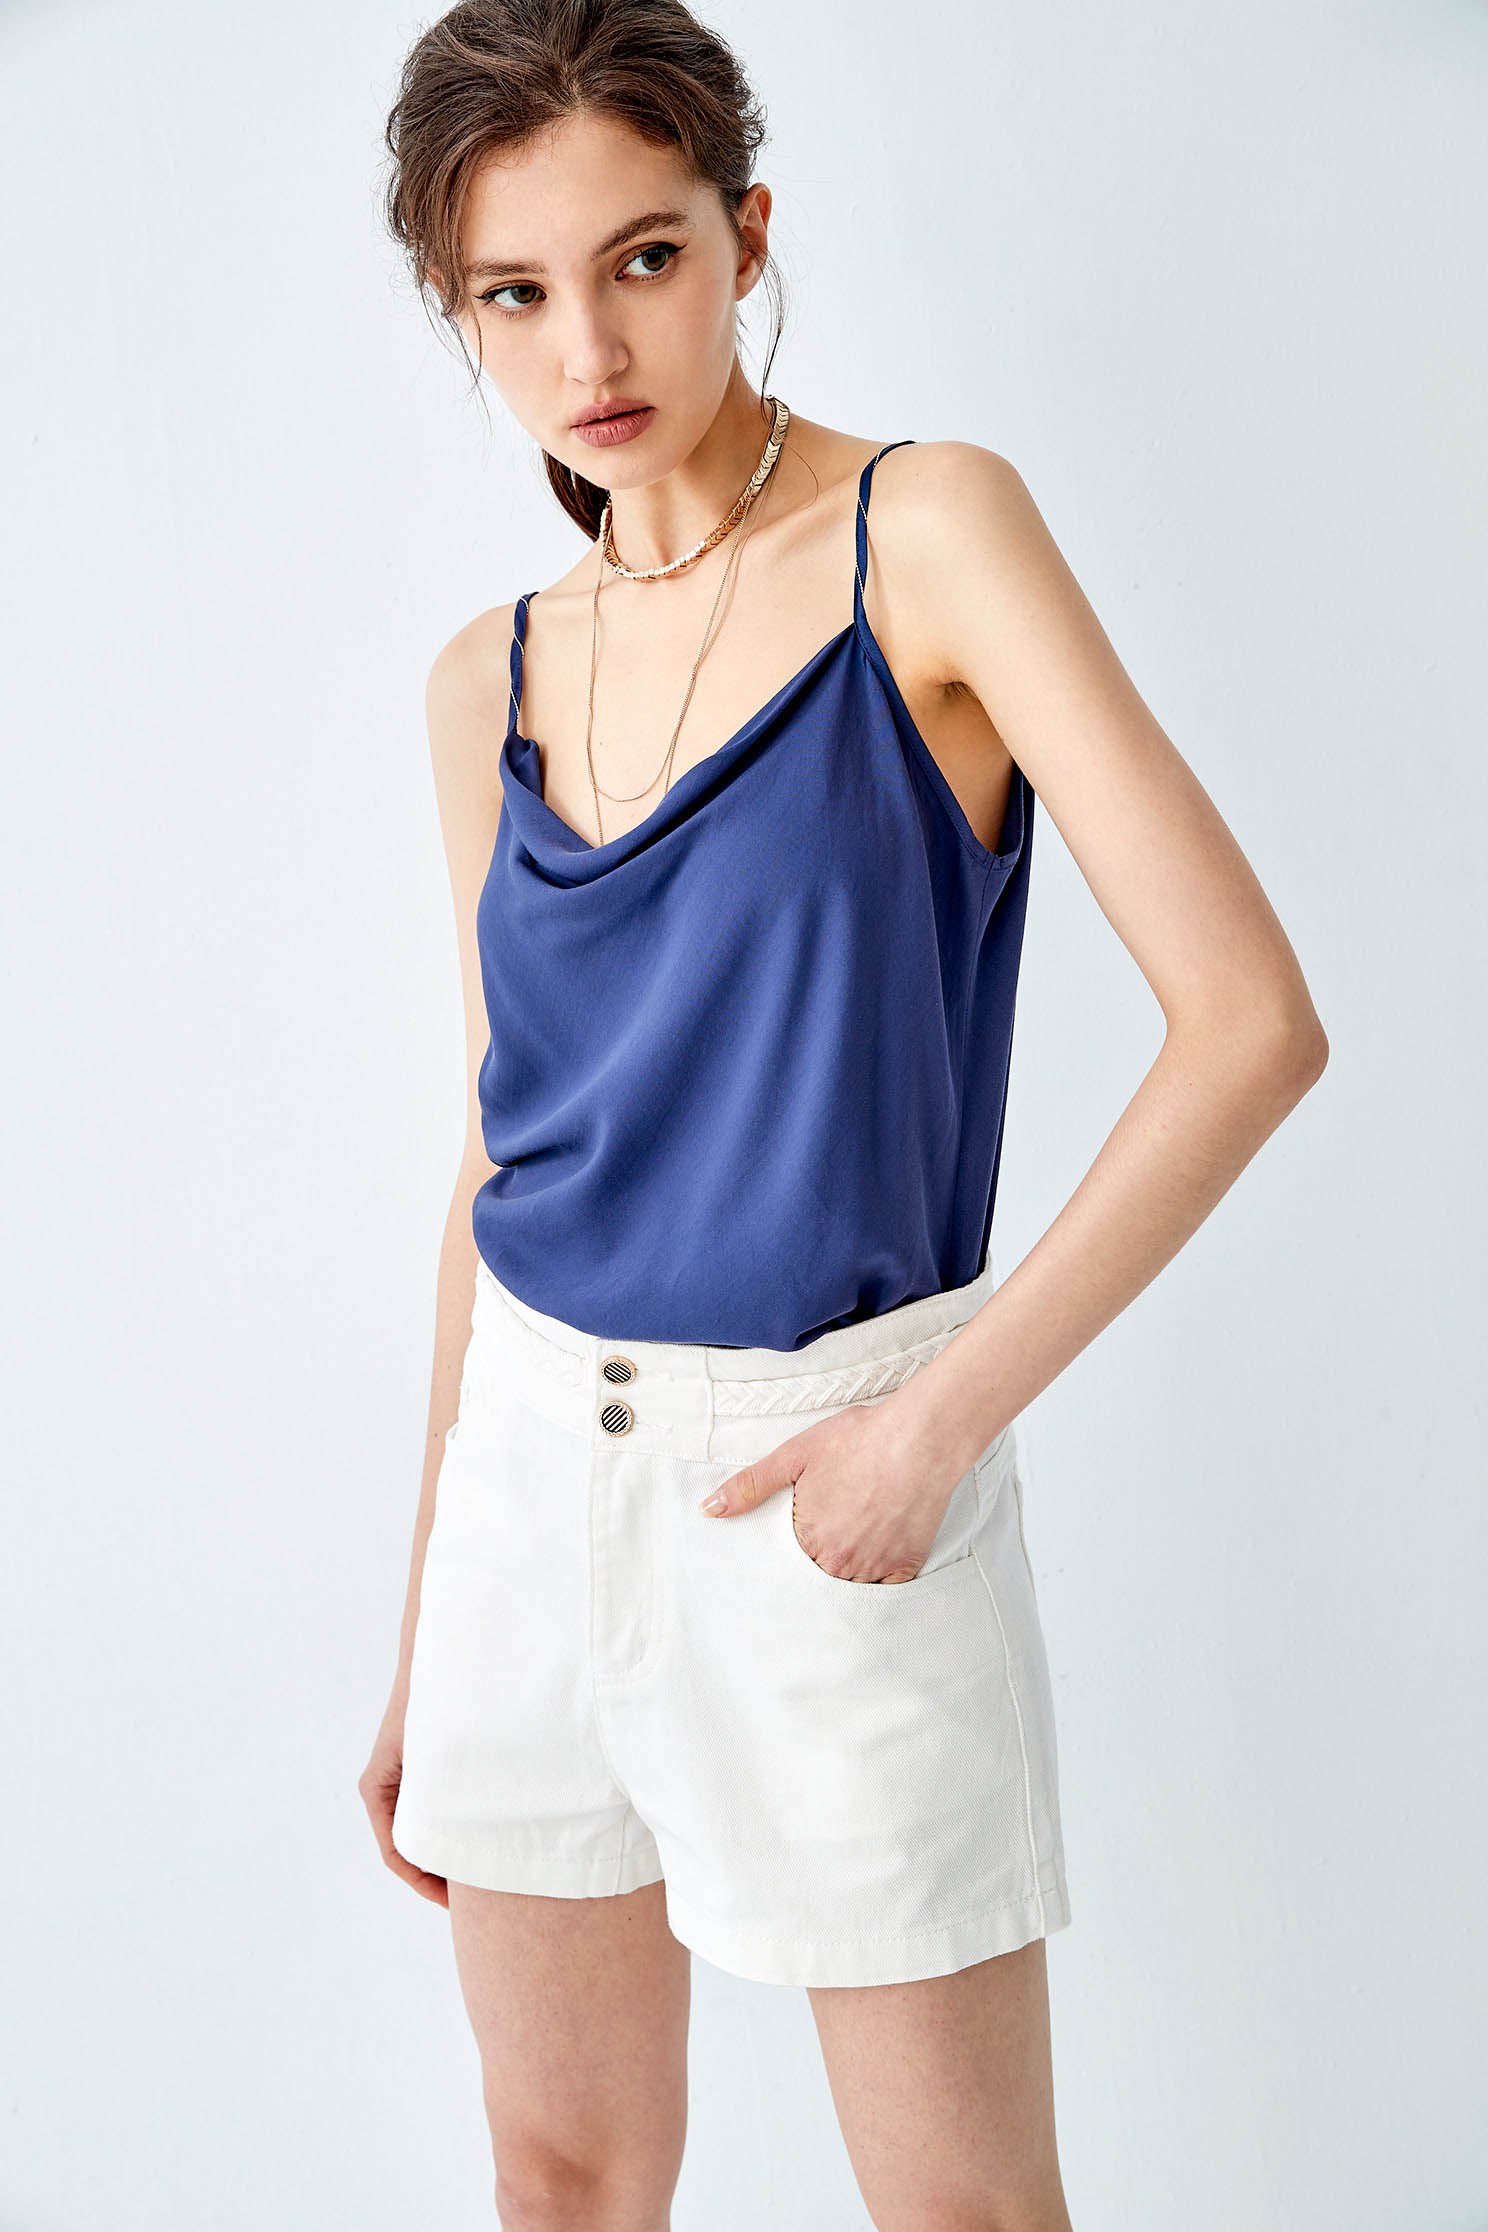 Strappy vest with beads chain,Season (SS) Look,coolsummer,iROO LIVE,Thin straps,sleeveless tops